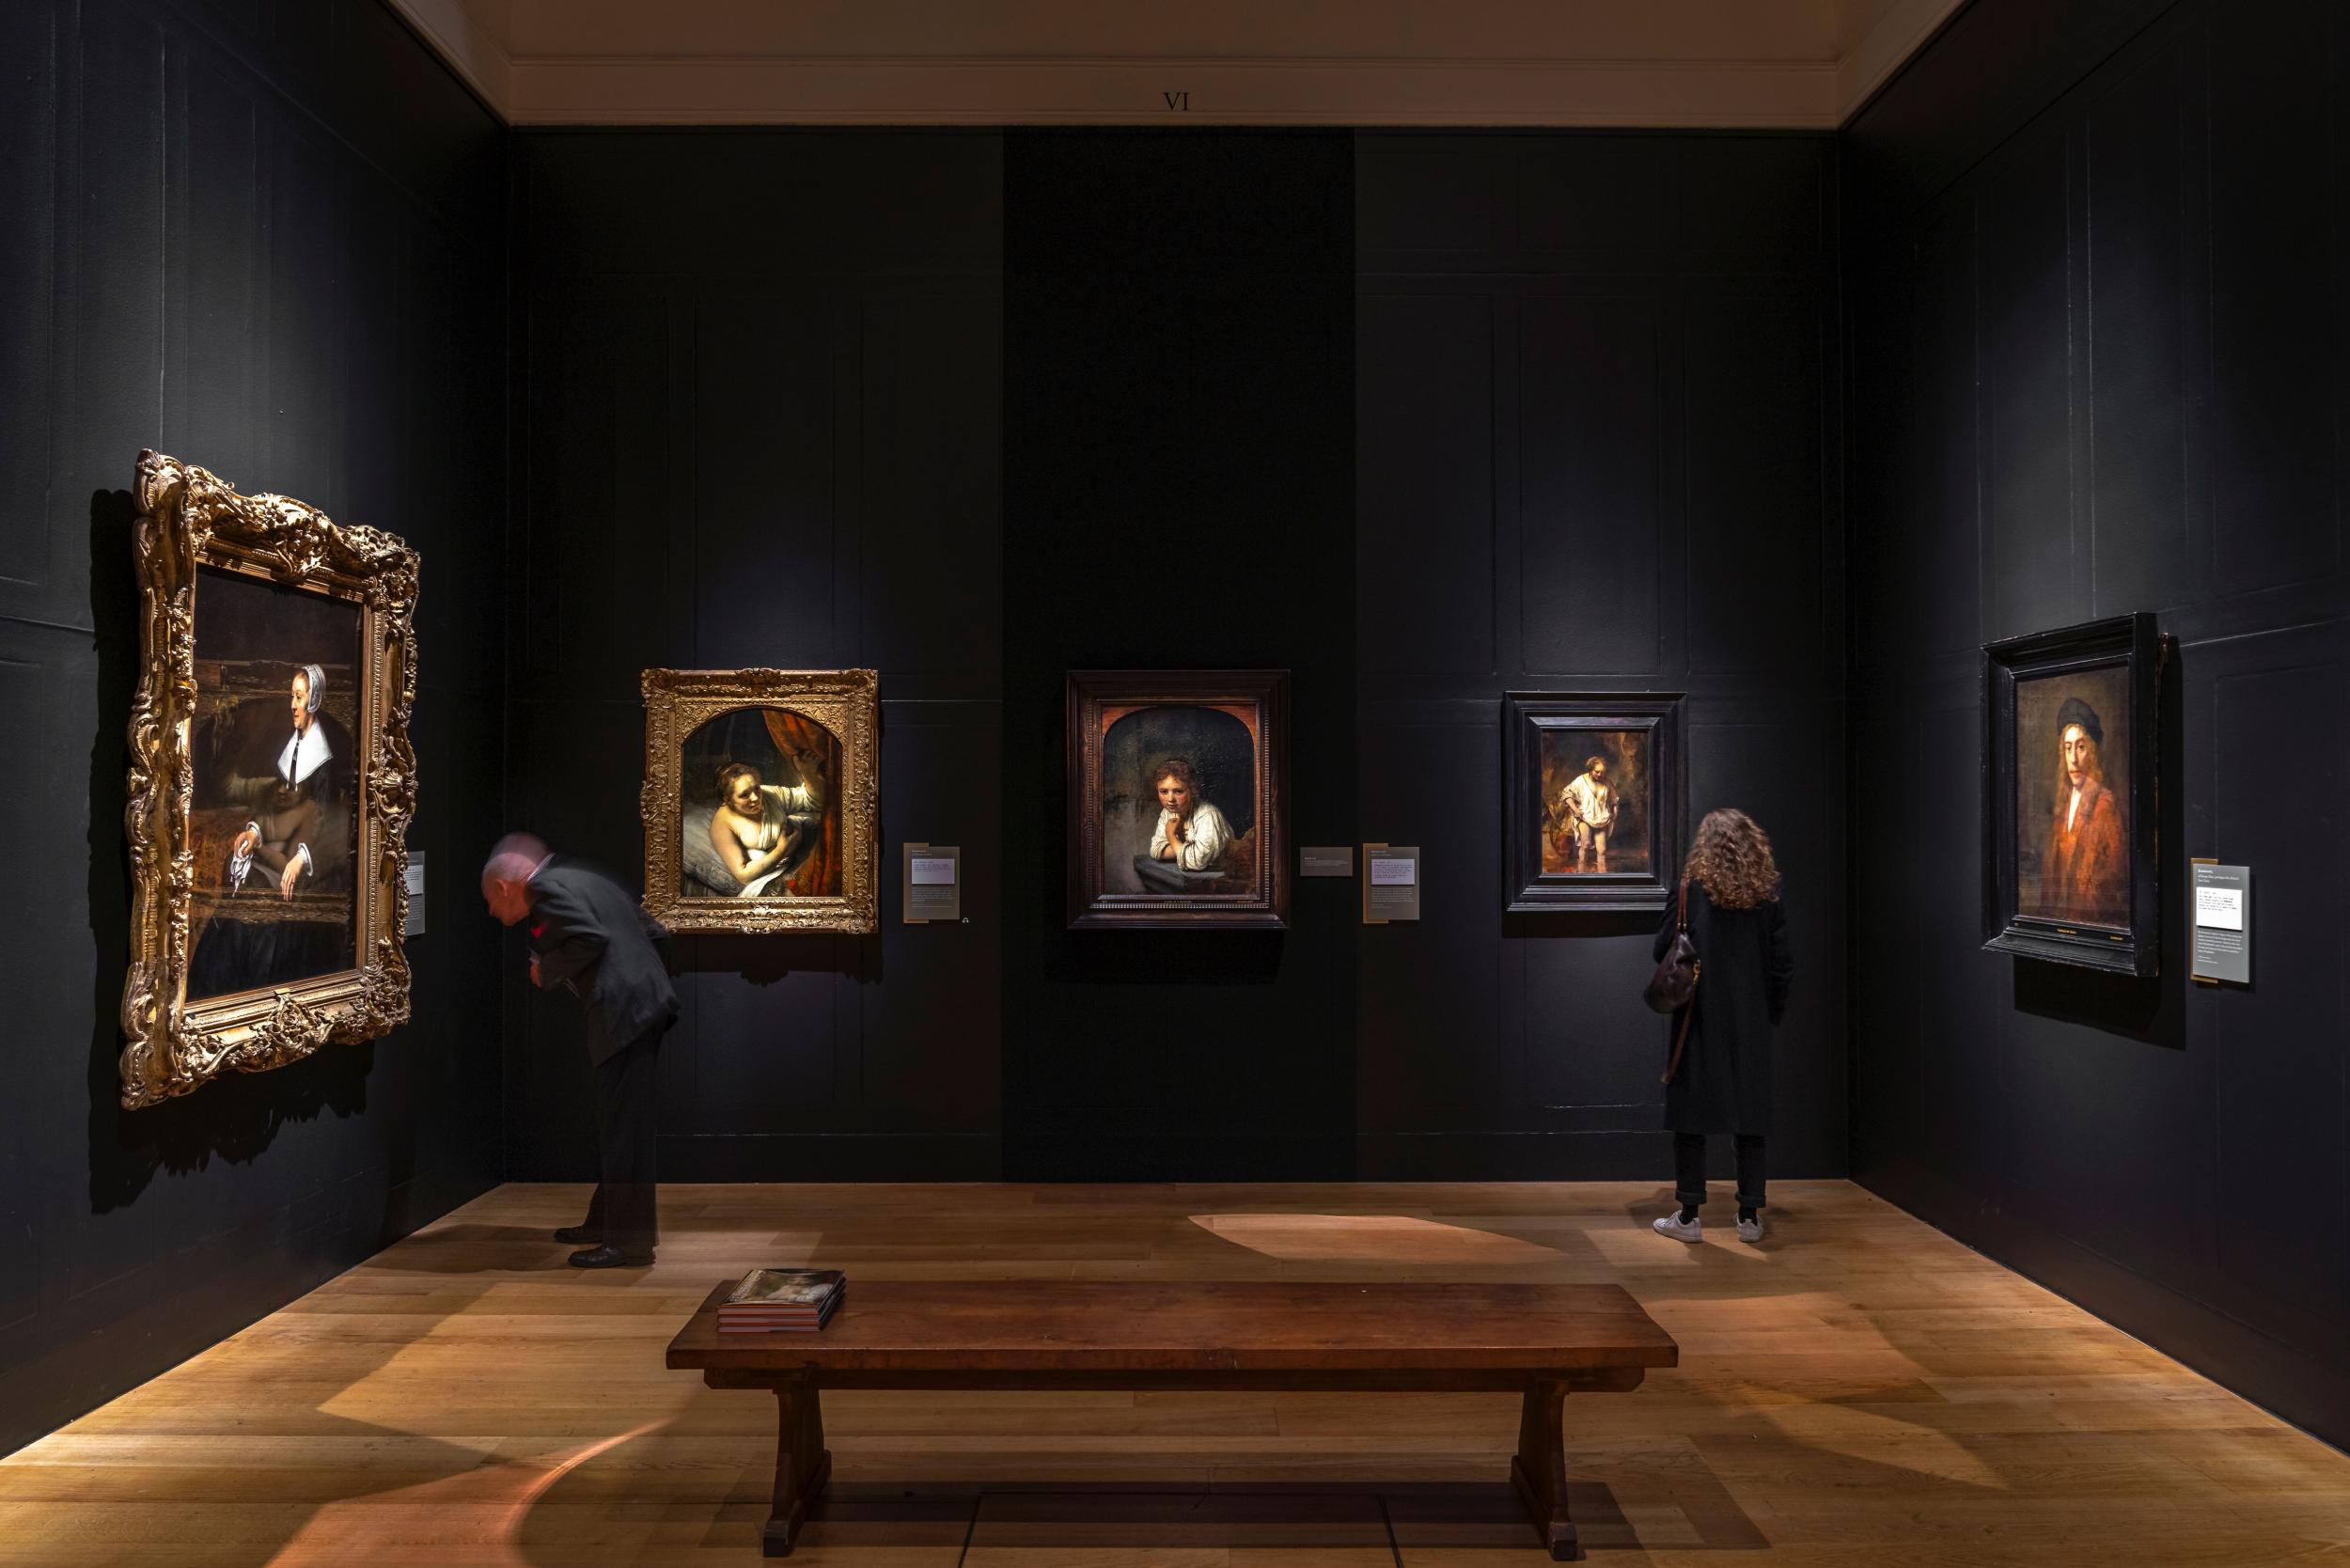 The exhibition features major Rembrandt works loaned from The Louvre in Paris and Amsterdam's Rijksmuseum